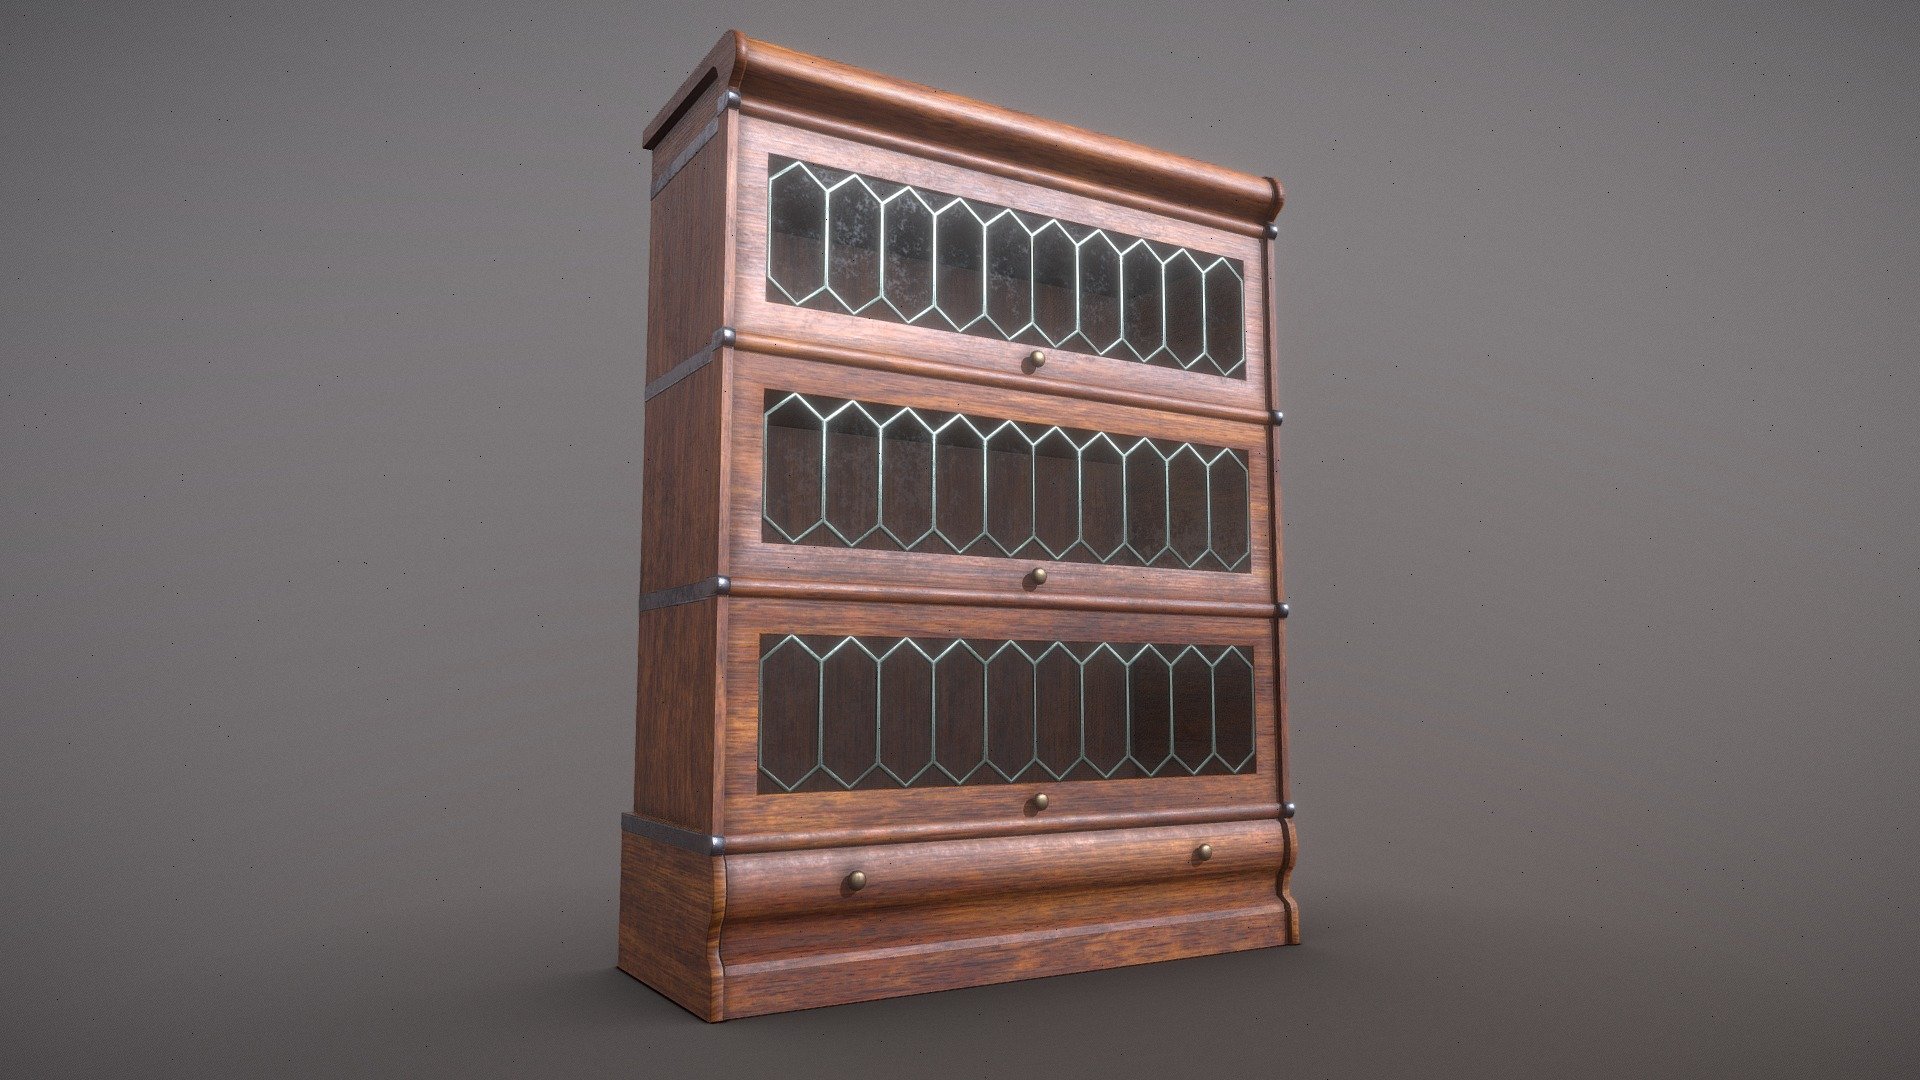 Wood Barrister Bookcase Shelf with Lead Glass Pattern on the windows. Popular style of shelving that were popular in the early to mid 20th century.

This is a static mesh with a 4k texture for the main body and a 1k texture for the windows. The bottom drawer can be pulled out in a 3D program if you want that to be partially open however. Made up of 3 bookcase sections with metal side strappings and stand on a shaped plinth.

Measures about 120cm tall

Poly - 2389
Vert - 2314 - Wood Barrister Bookcase Shelf - Buy Royalty Free 3D model by Jordan F (@JordanF) 3d model